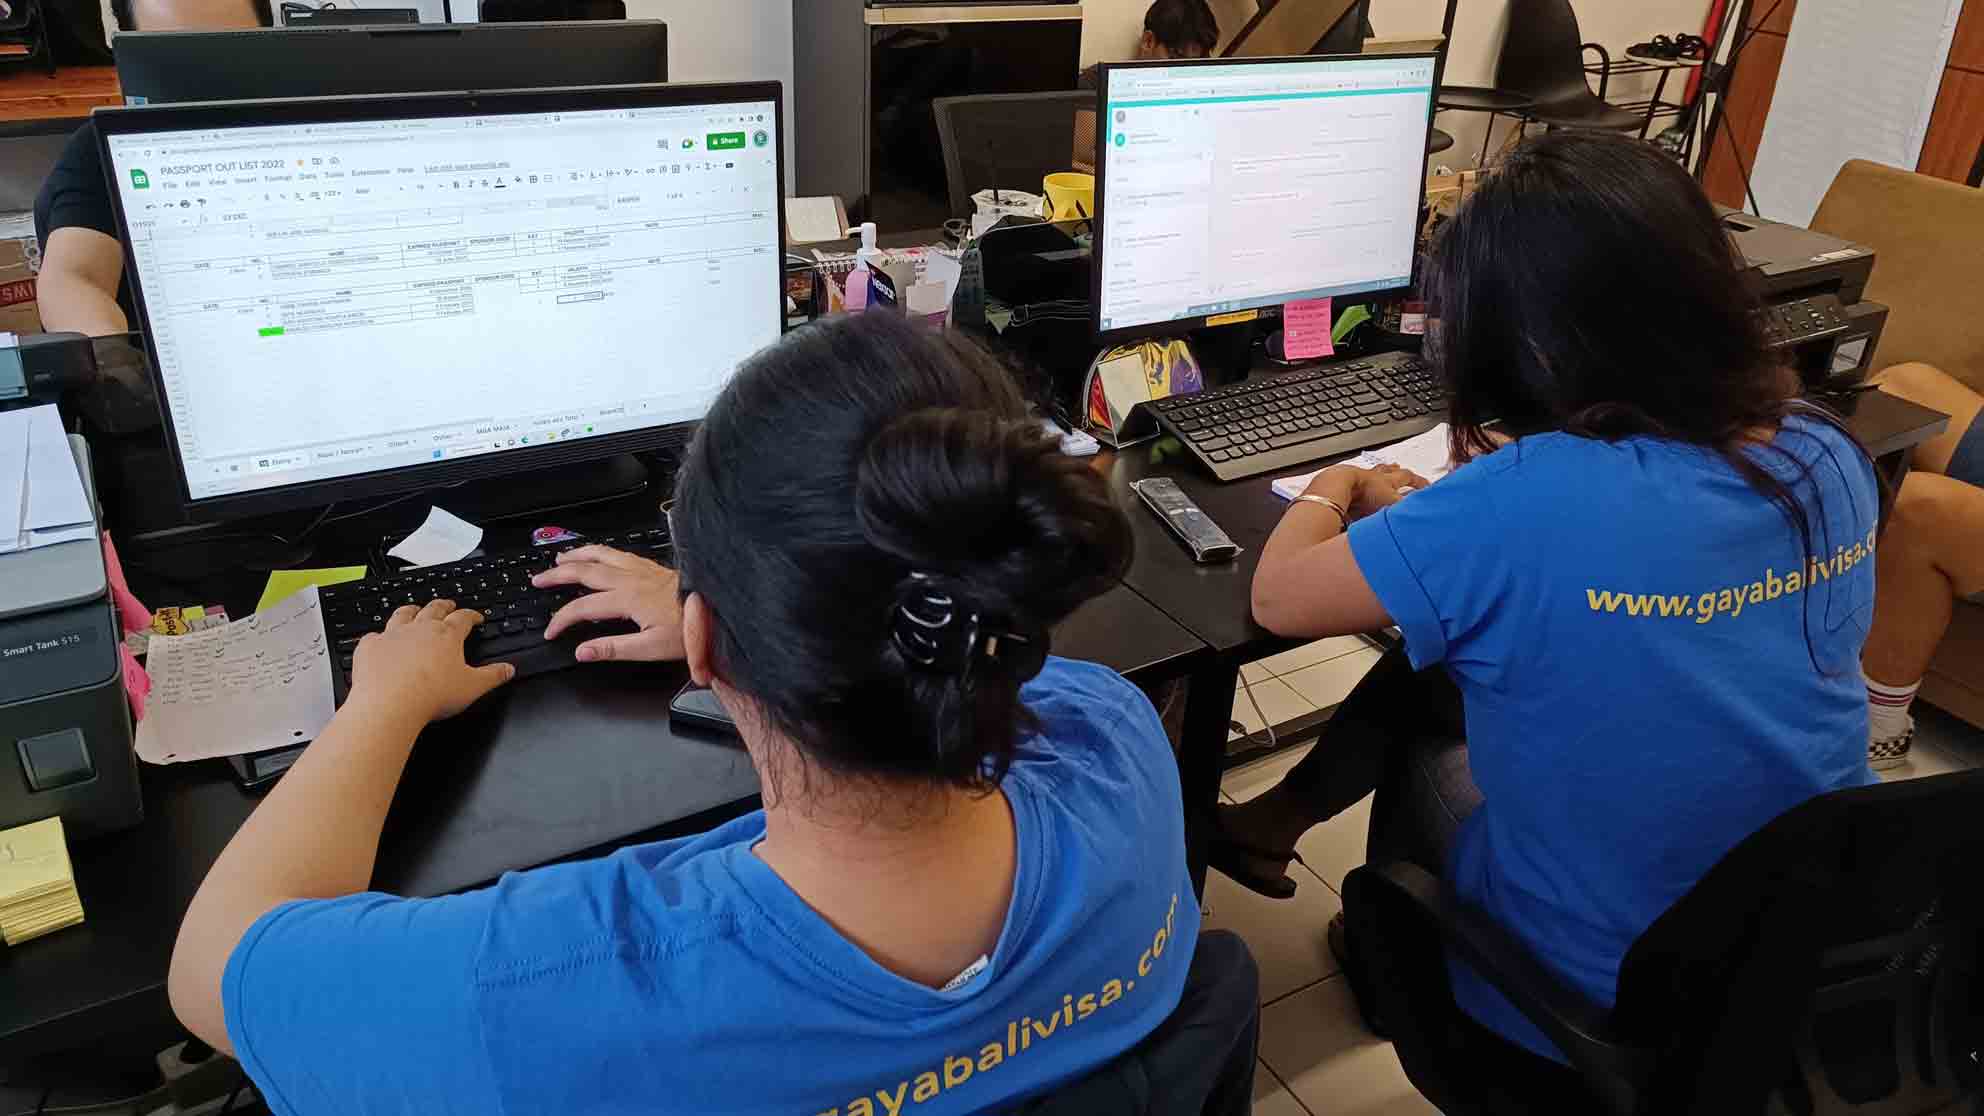 Picture of Oca and Delsi staff of Gaya Bali Visa working on computer